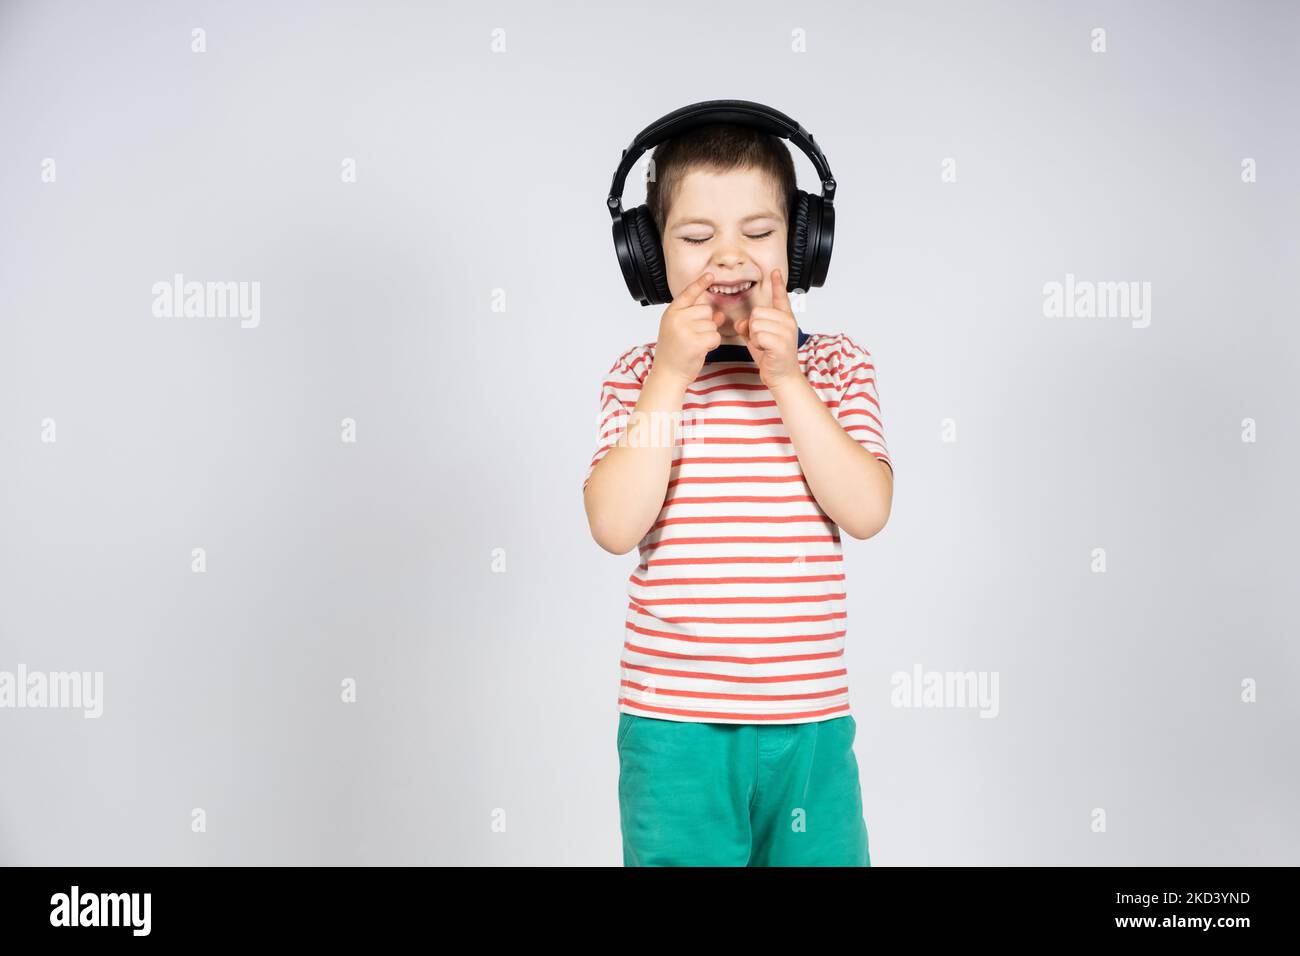 Cute 5 year old boy in big black headphones laughs and points his fingers up on a white background, a place for text to copy space Stock Photo